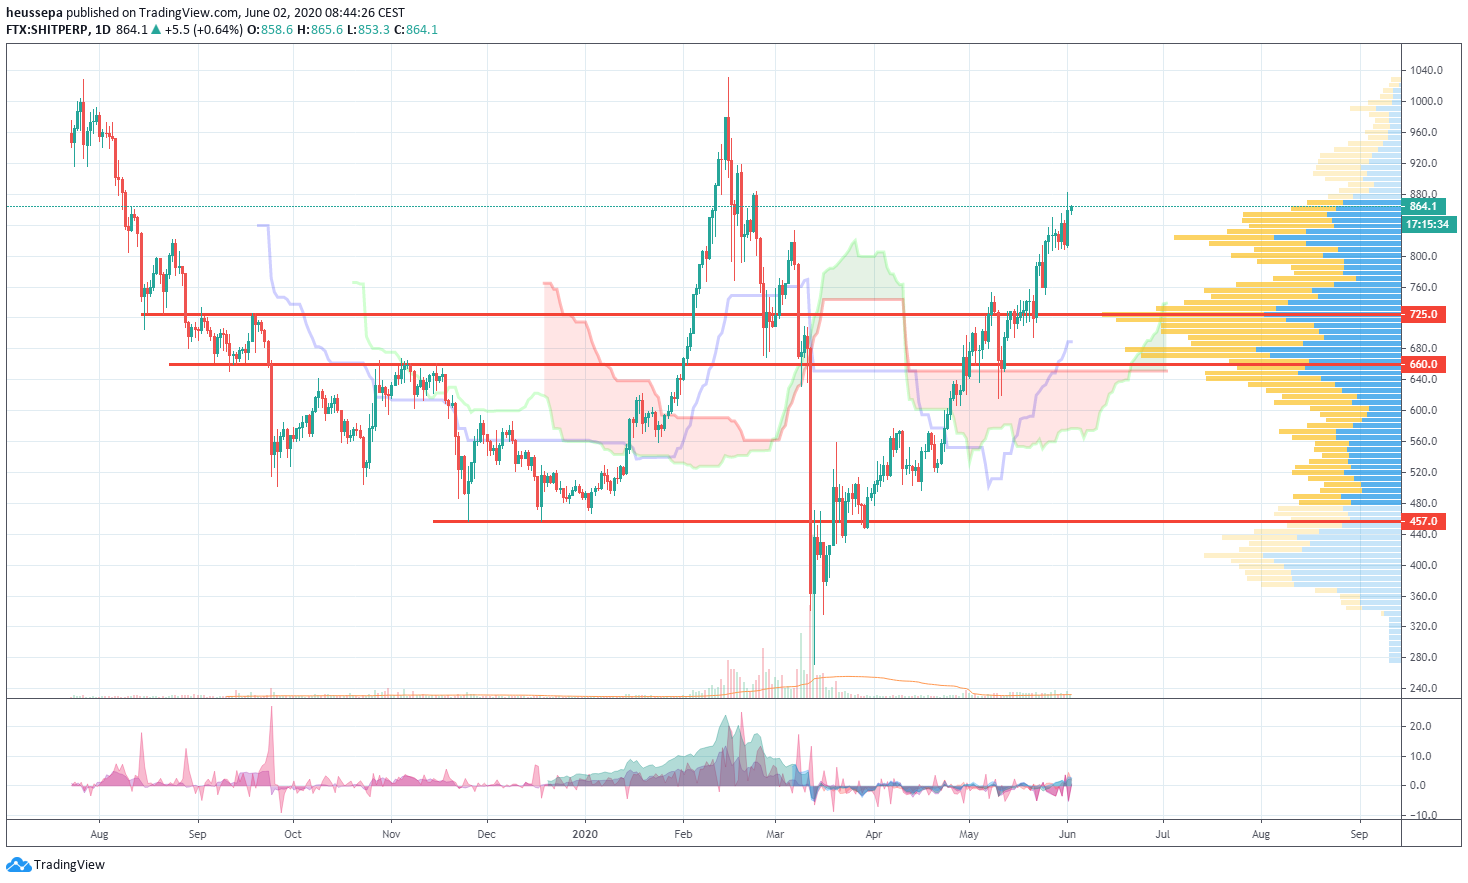 Daily market commentary from 02.06.2020 - Crypto Valley ...